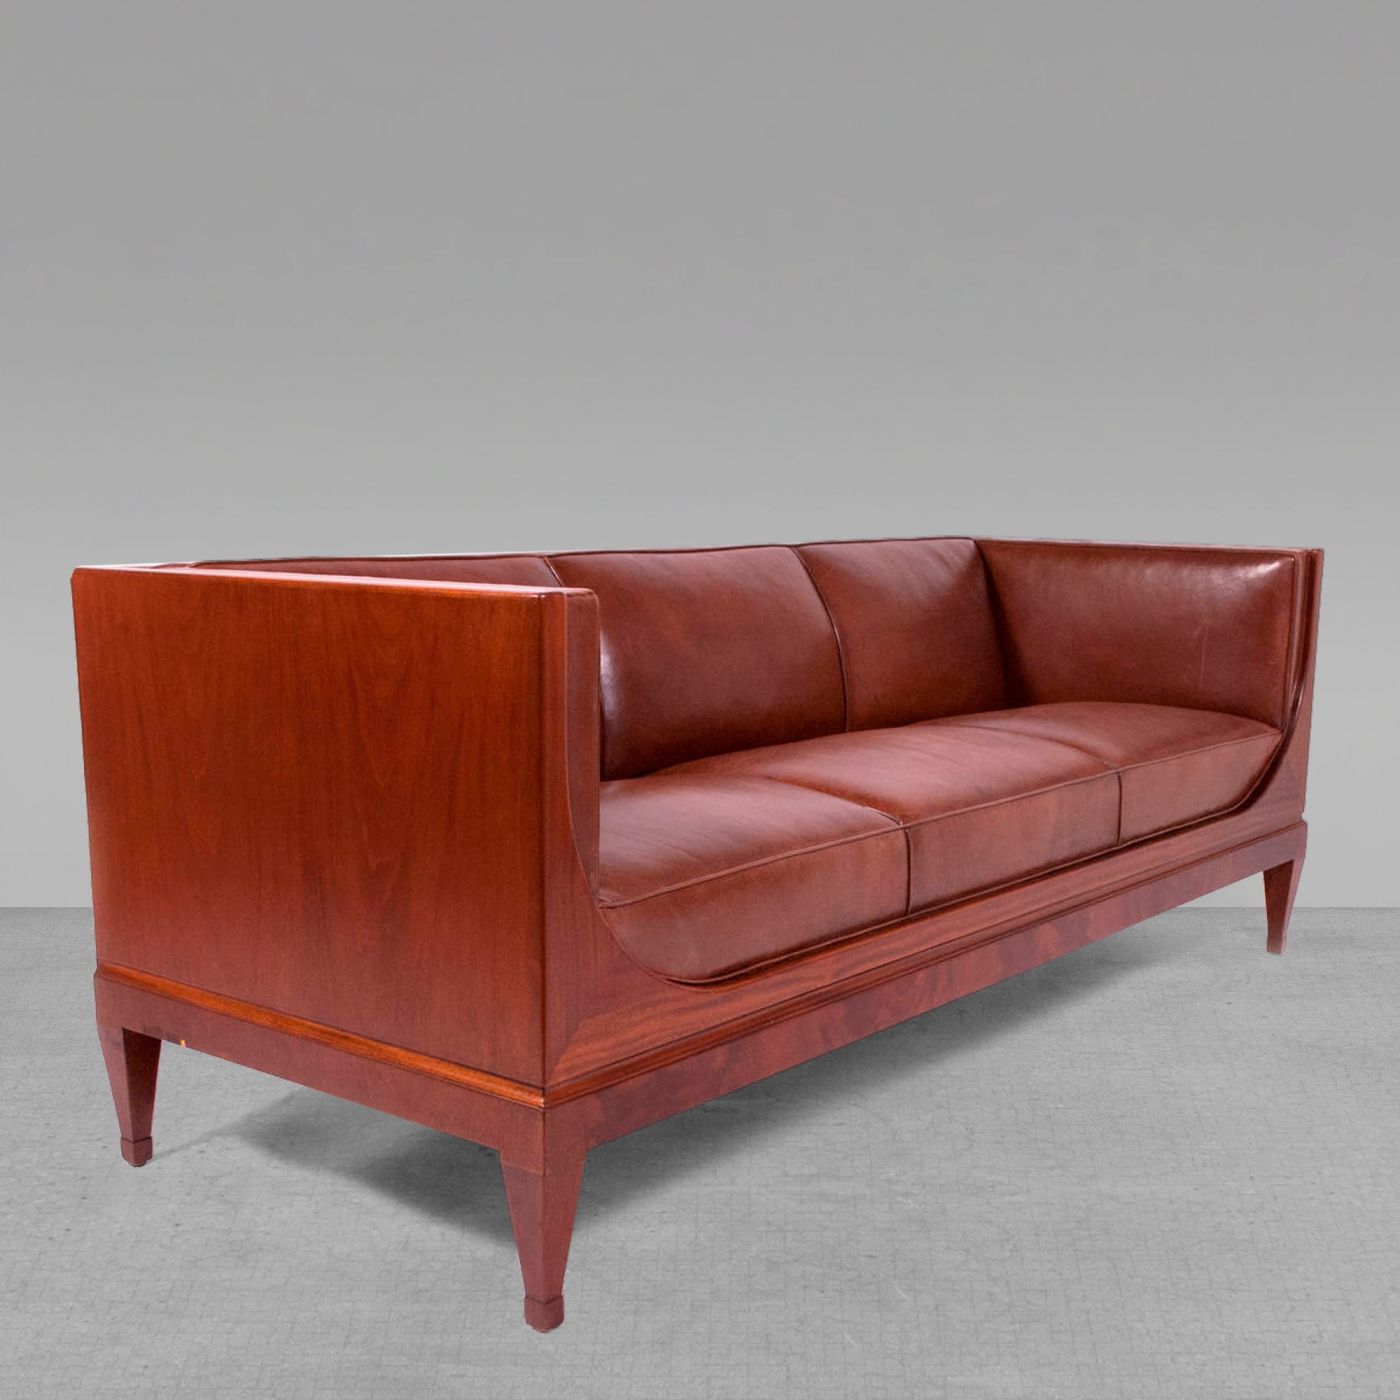 Frits Henningsen – Classic Sofafrits Henningsen, 1930s Intended For 1930s Couch (Photo 185 of 299)